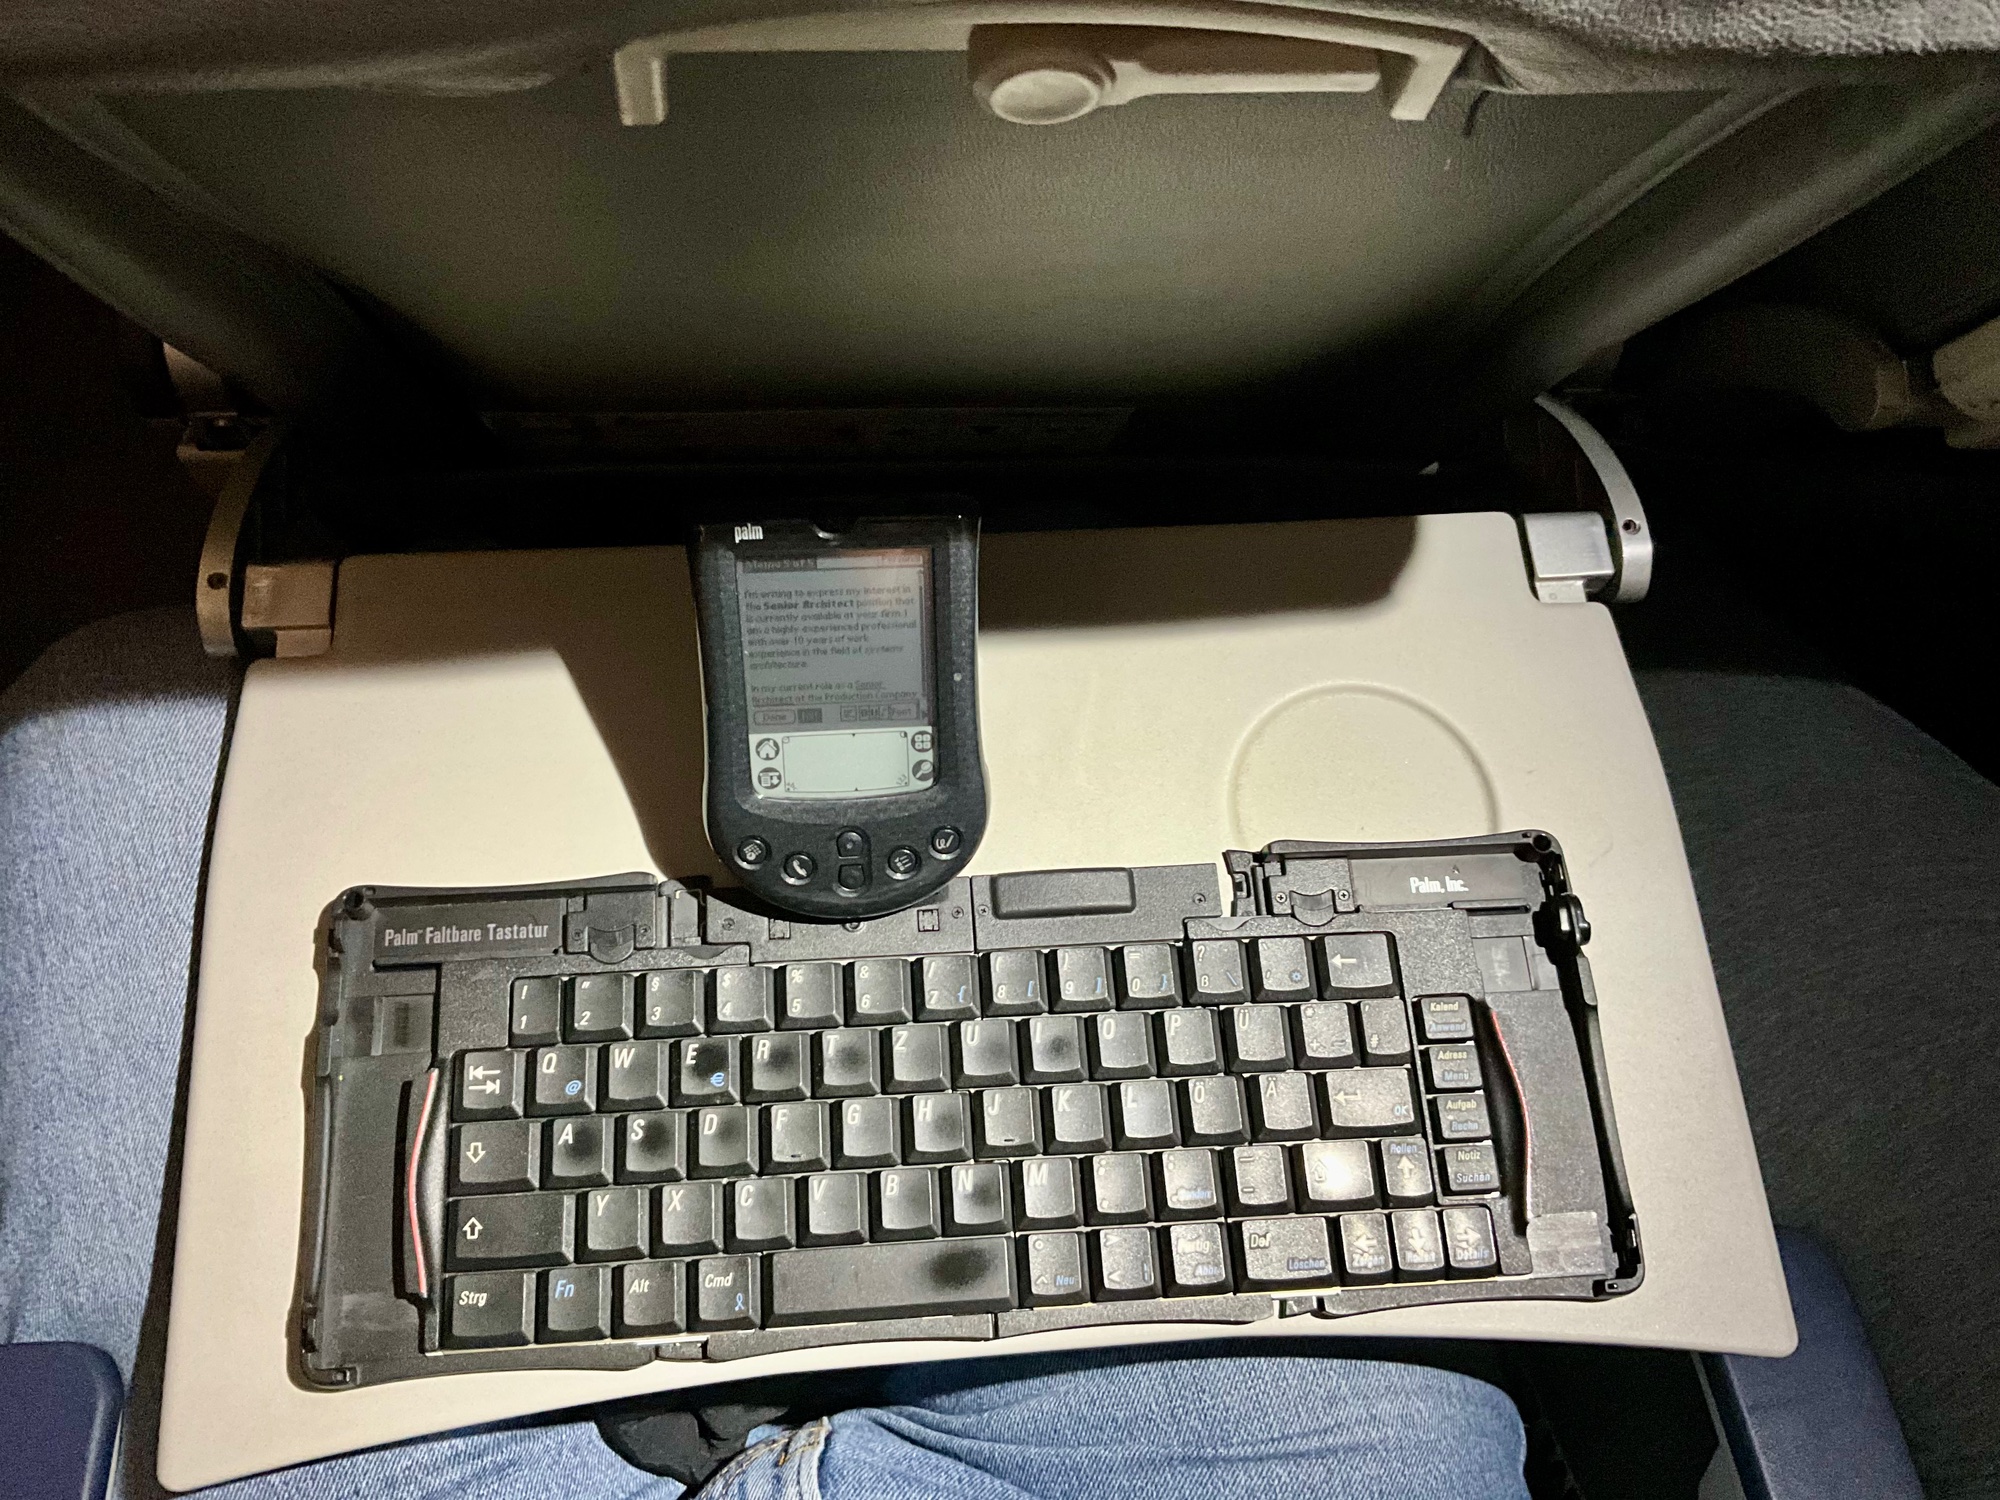 The Palm m125 with the Stowaway keyboard on a tray table during a Ryanair flight